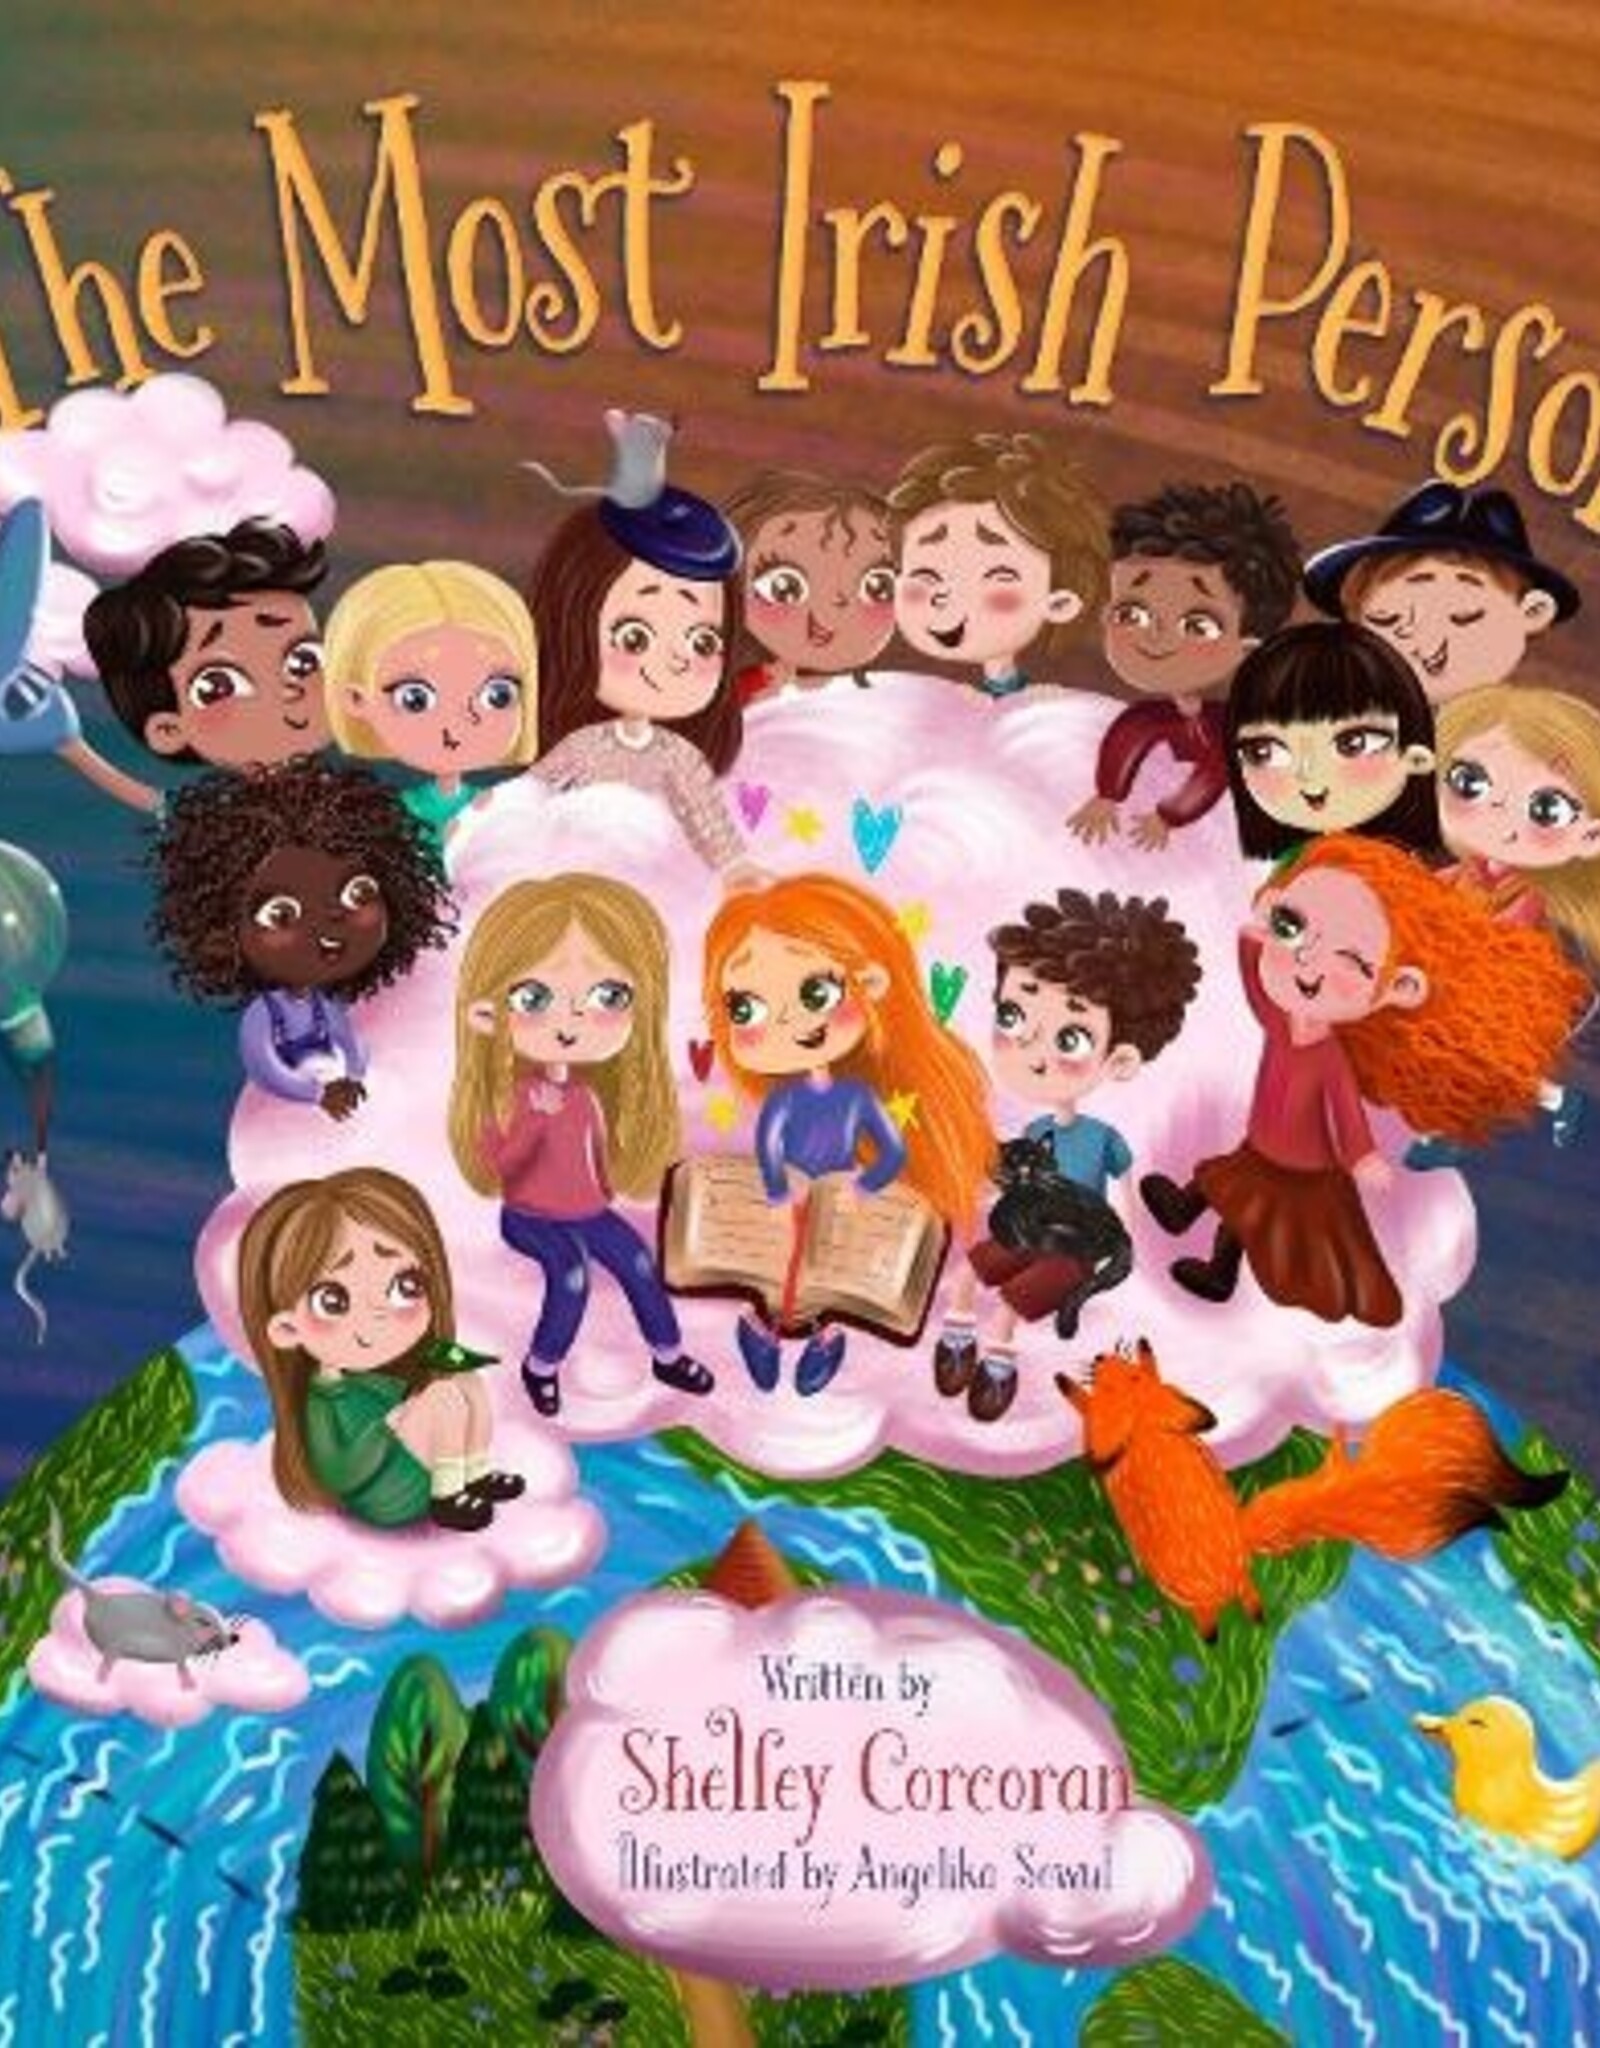 The Most Irish Person  - Shelly Corcoran